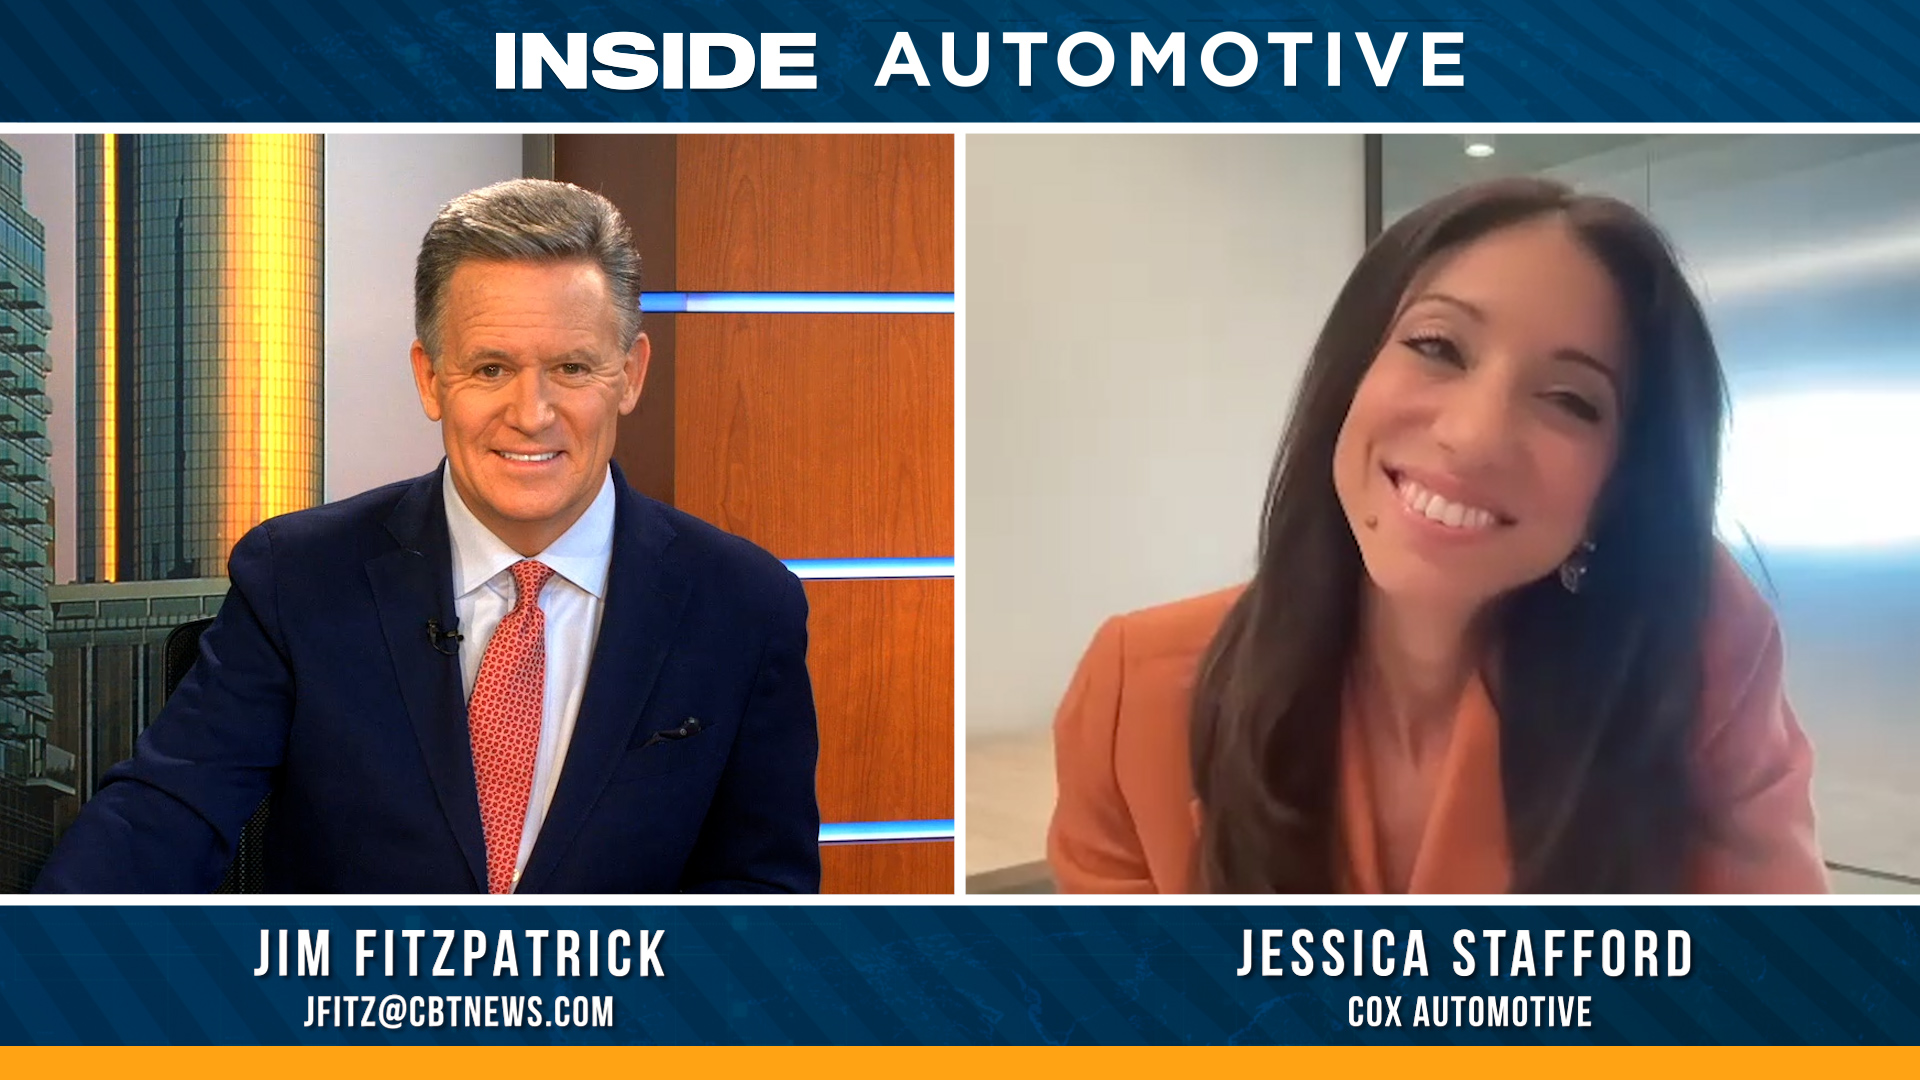 Jessica Stafford joins Inside Automotive to discuss how auto dealers and OEMs can work together to improve the customer experience.